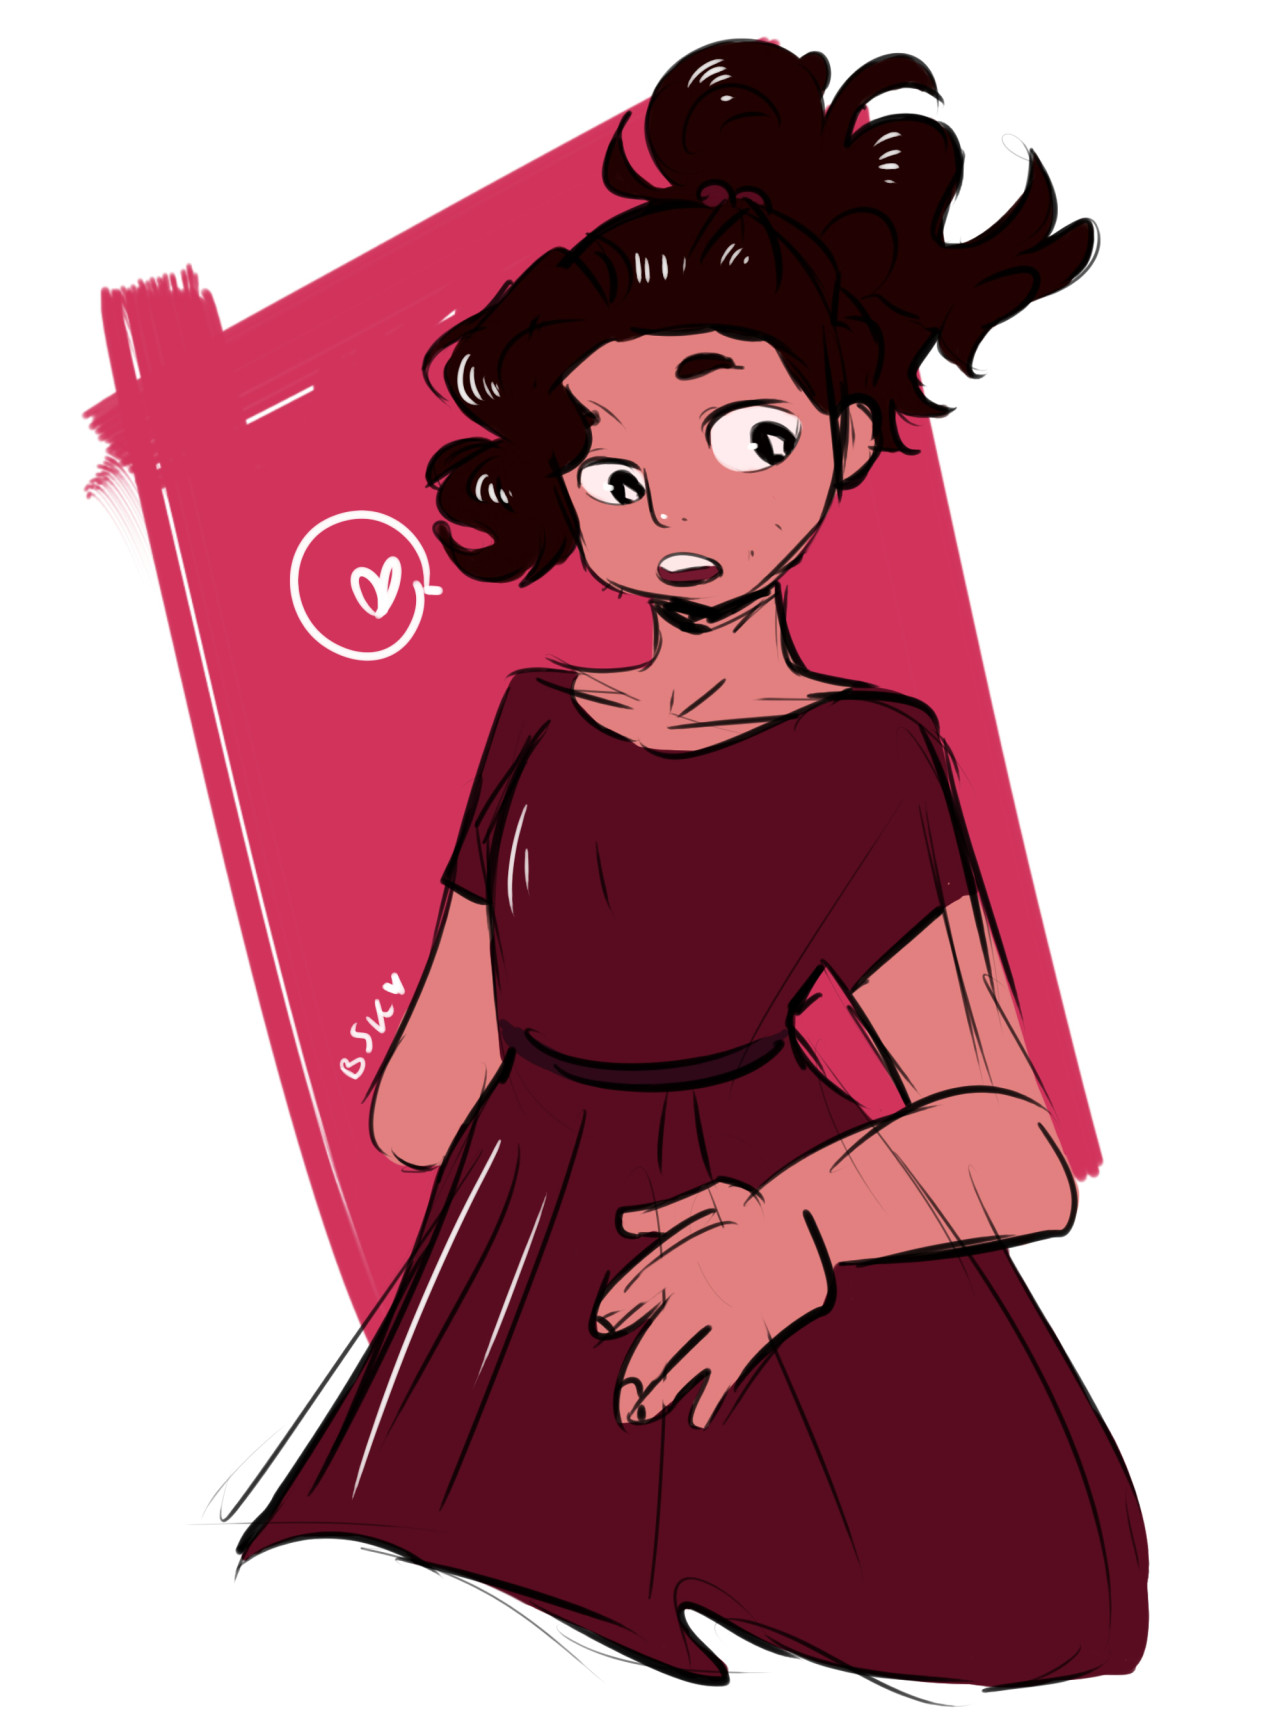 larevueltamx said: C3 stevonnie Answer: stevonnie in a cute dress was not something i knew i needed up until now but,, i did send me an outfit and a character!!